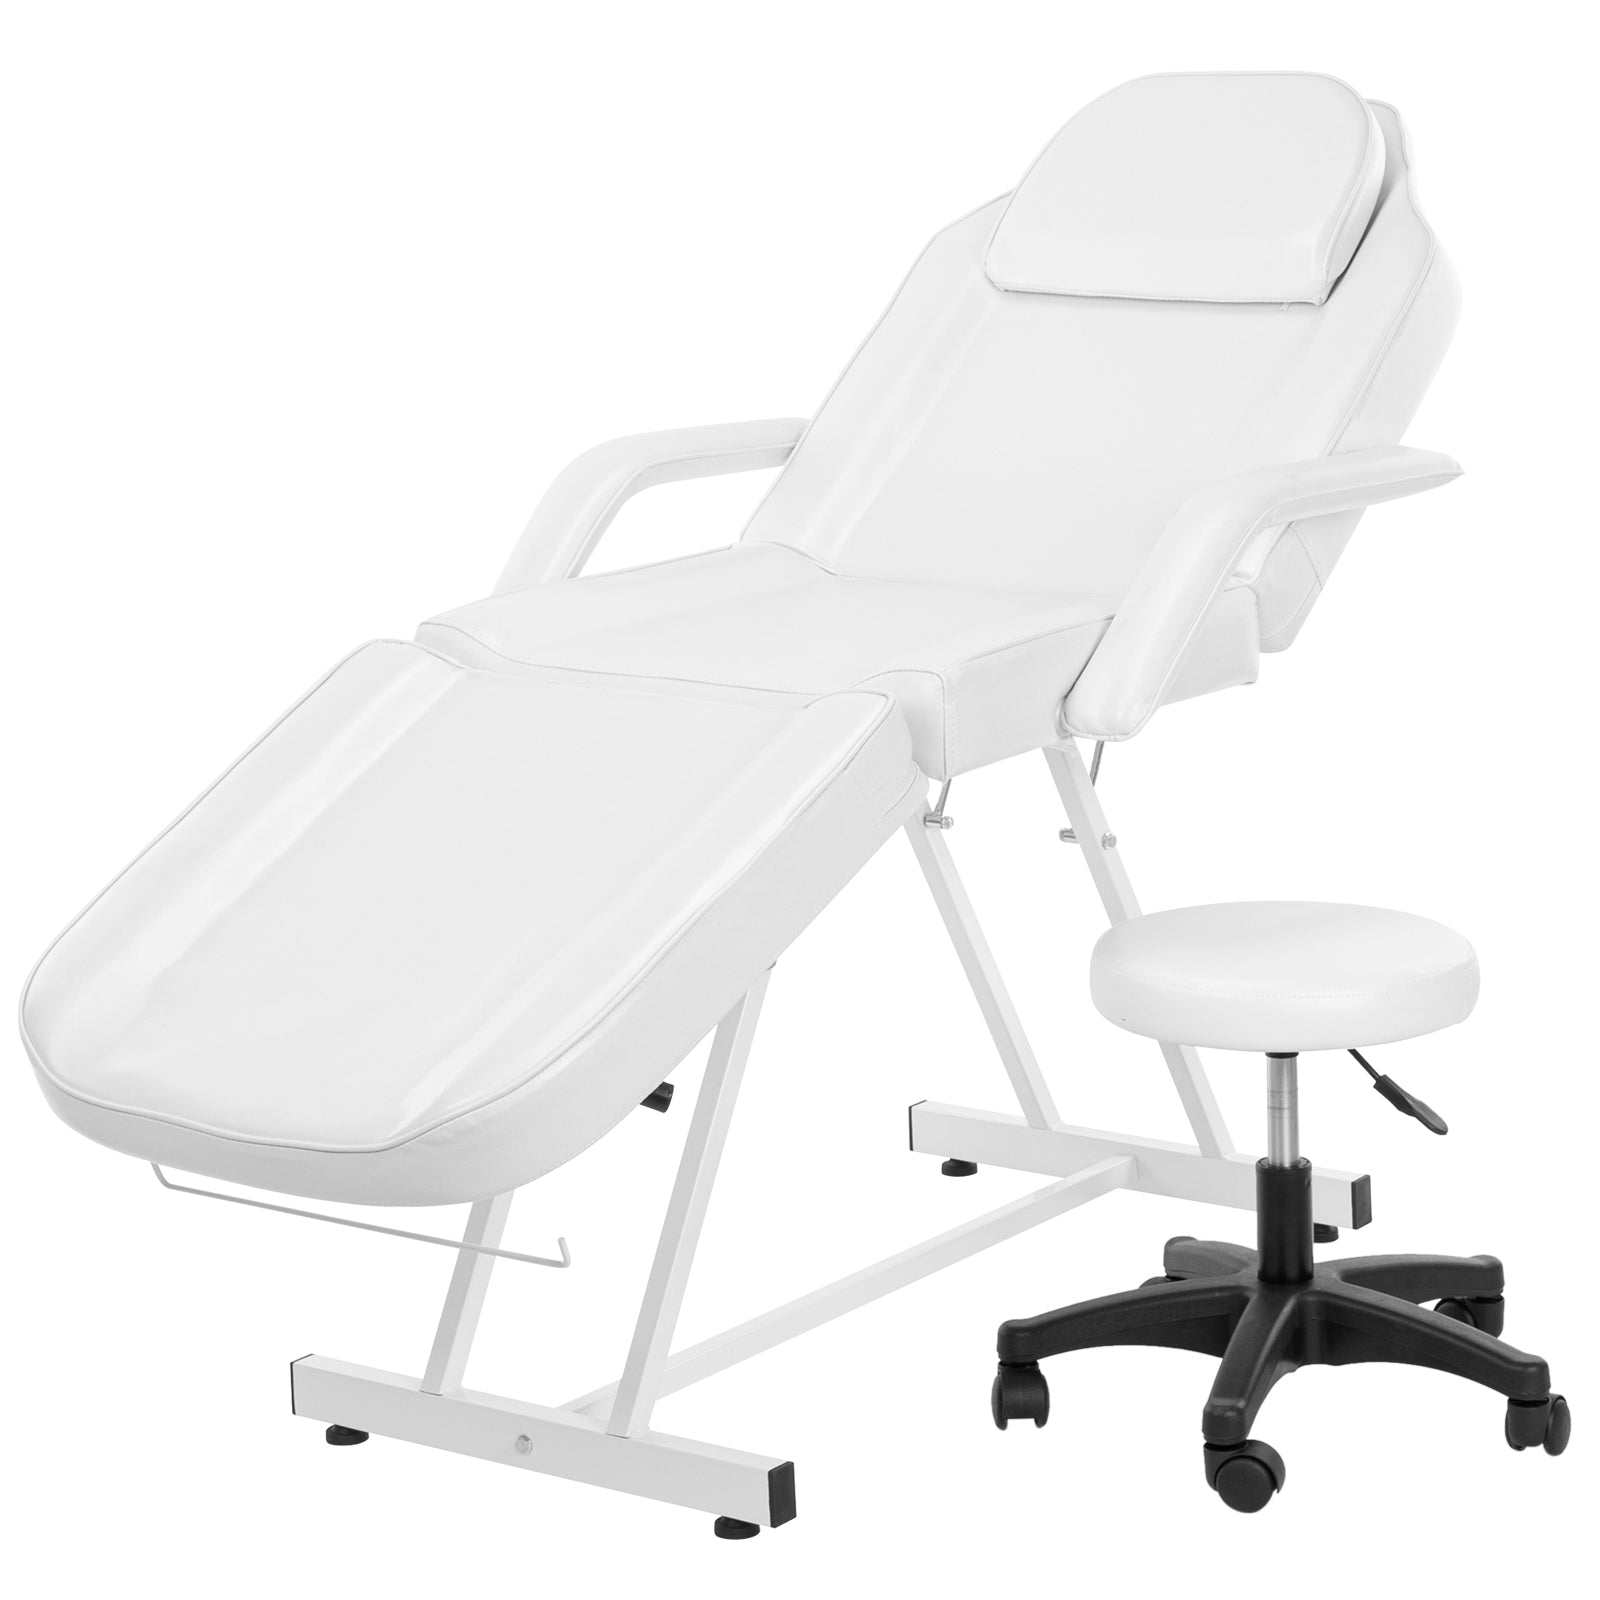 OmySalon Electric Massage Table Salon Spa Facial Bed with Hydraulic Stool  Black/White